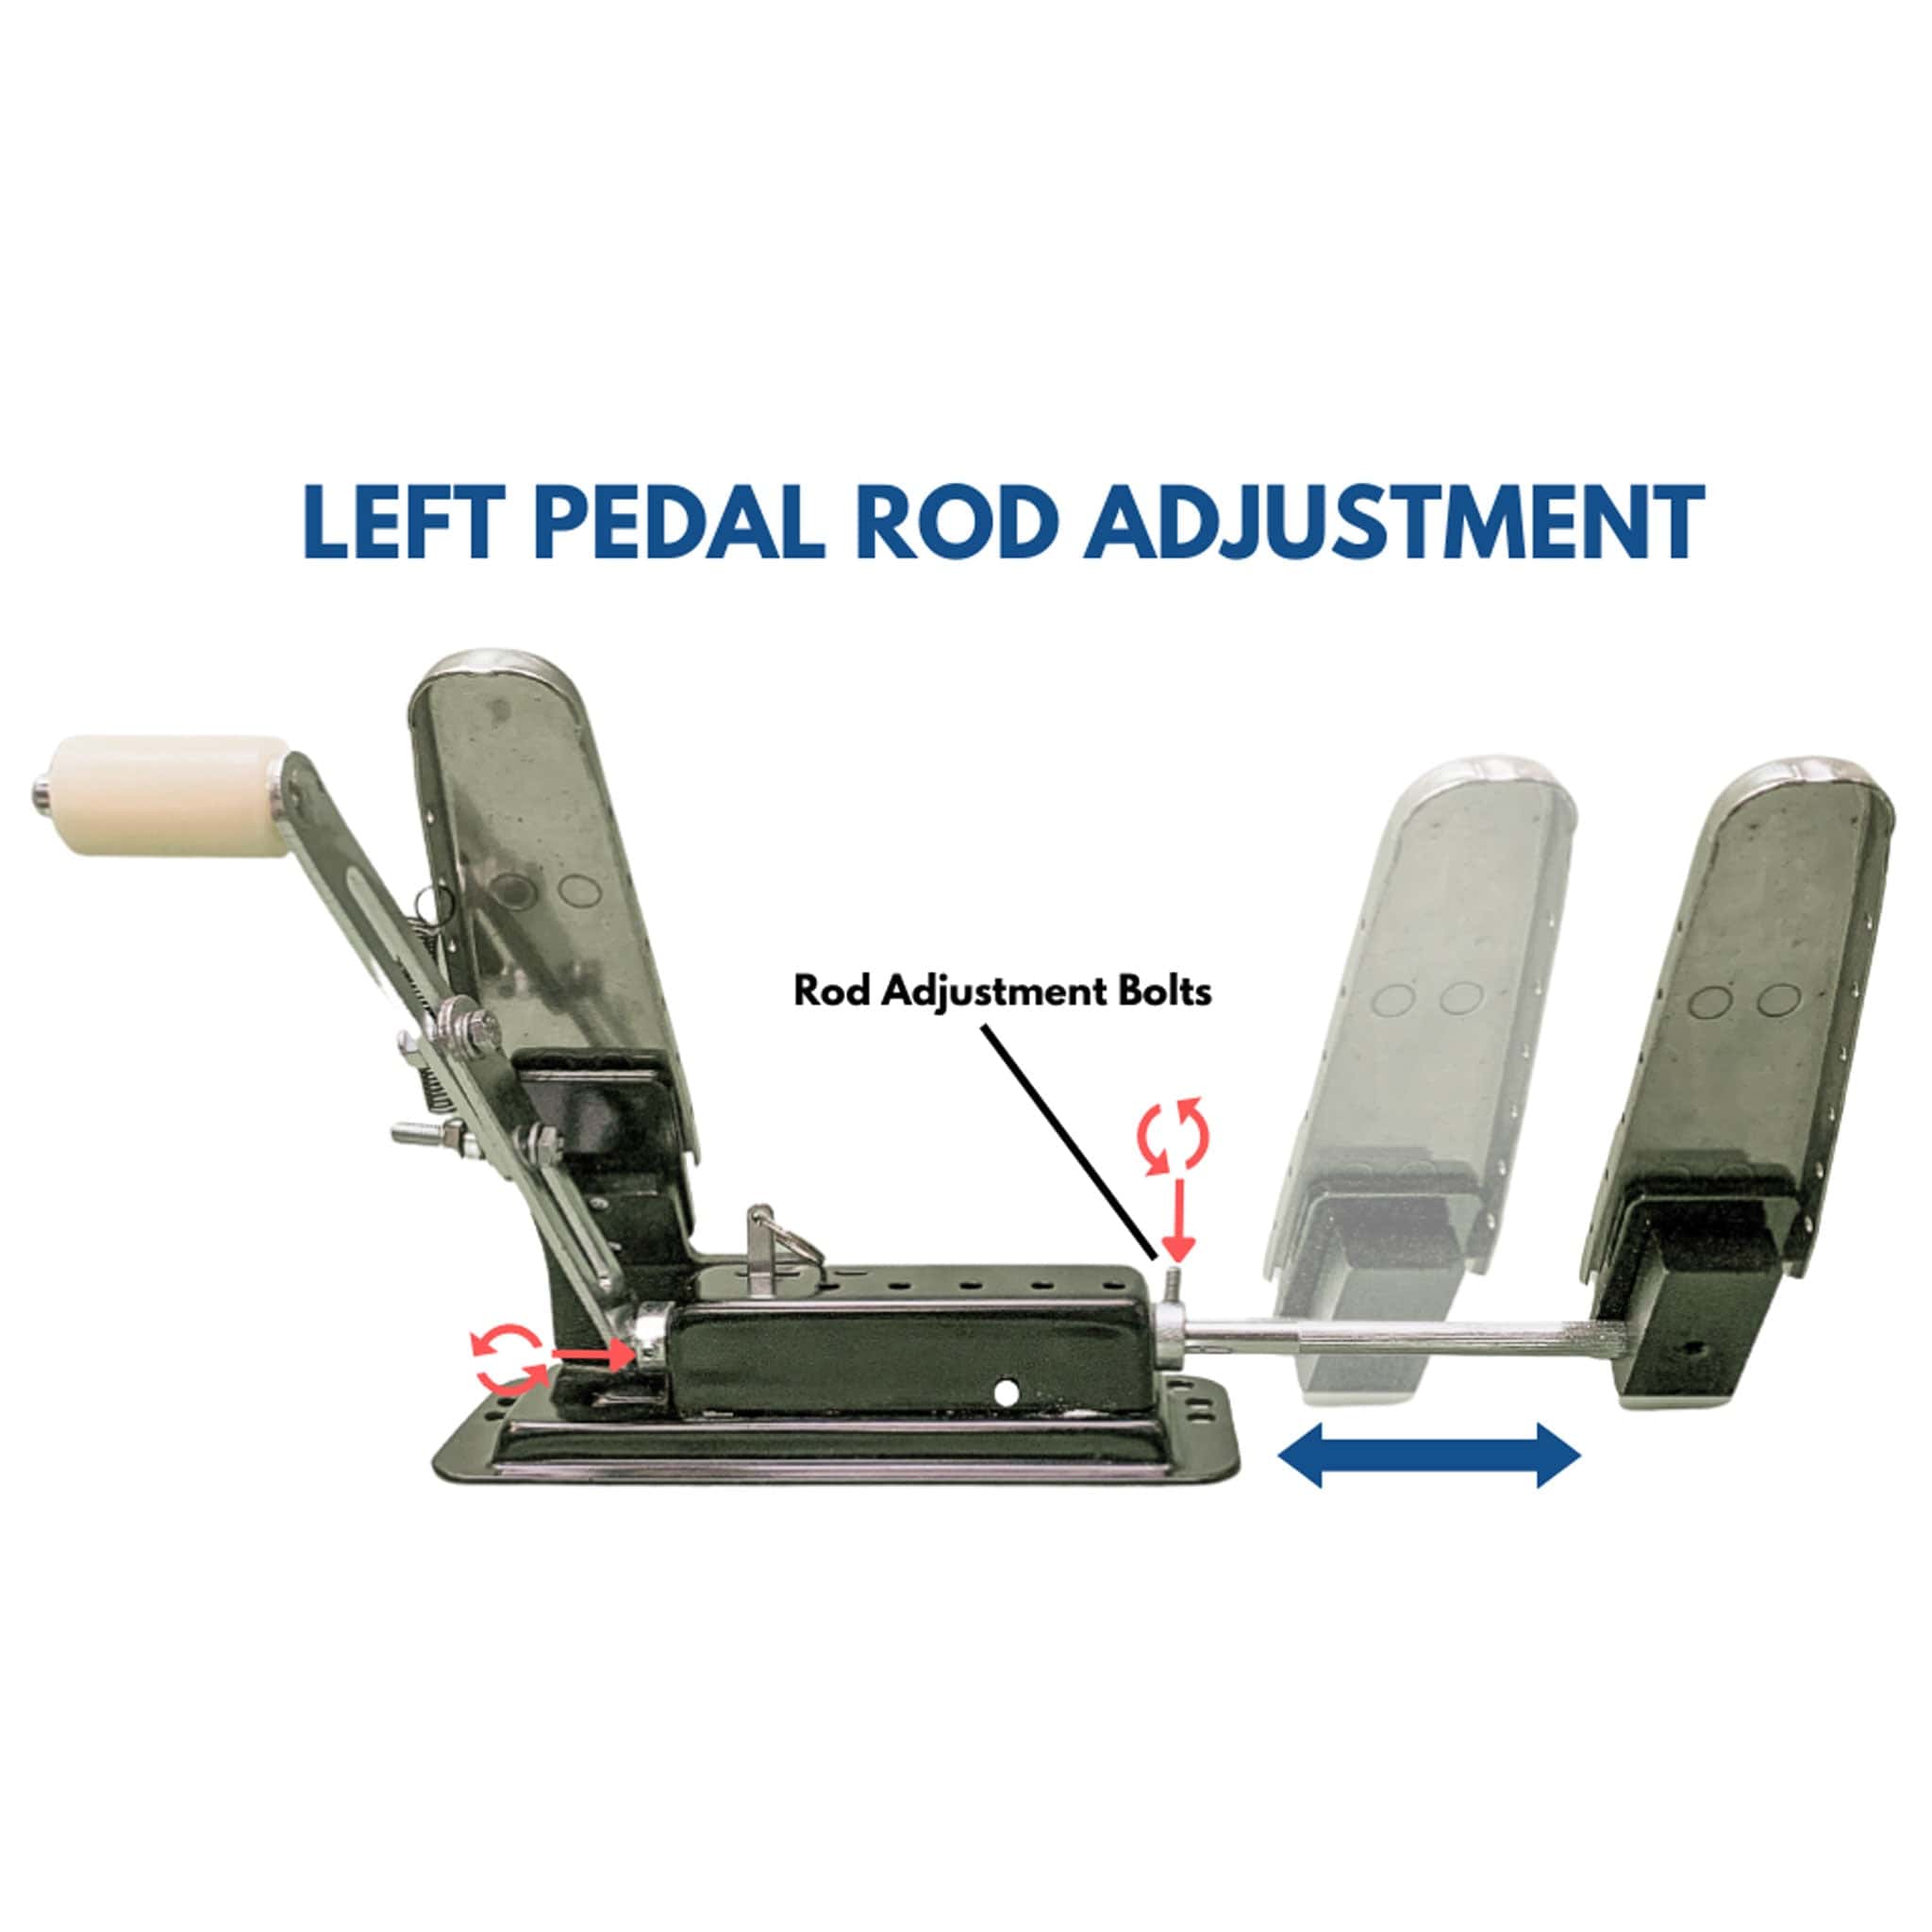 Able Motion Mobility Mobility Accessories Affordable Left Foot Pedal Accelerator Affordable Left Foot Pedal Accelerator